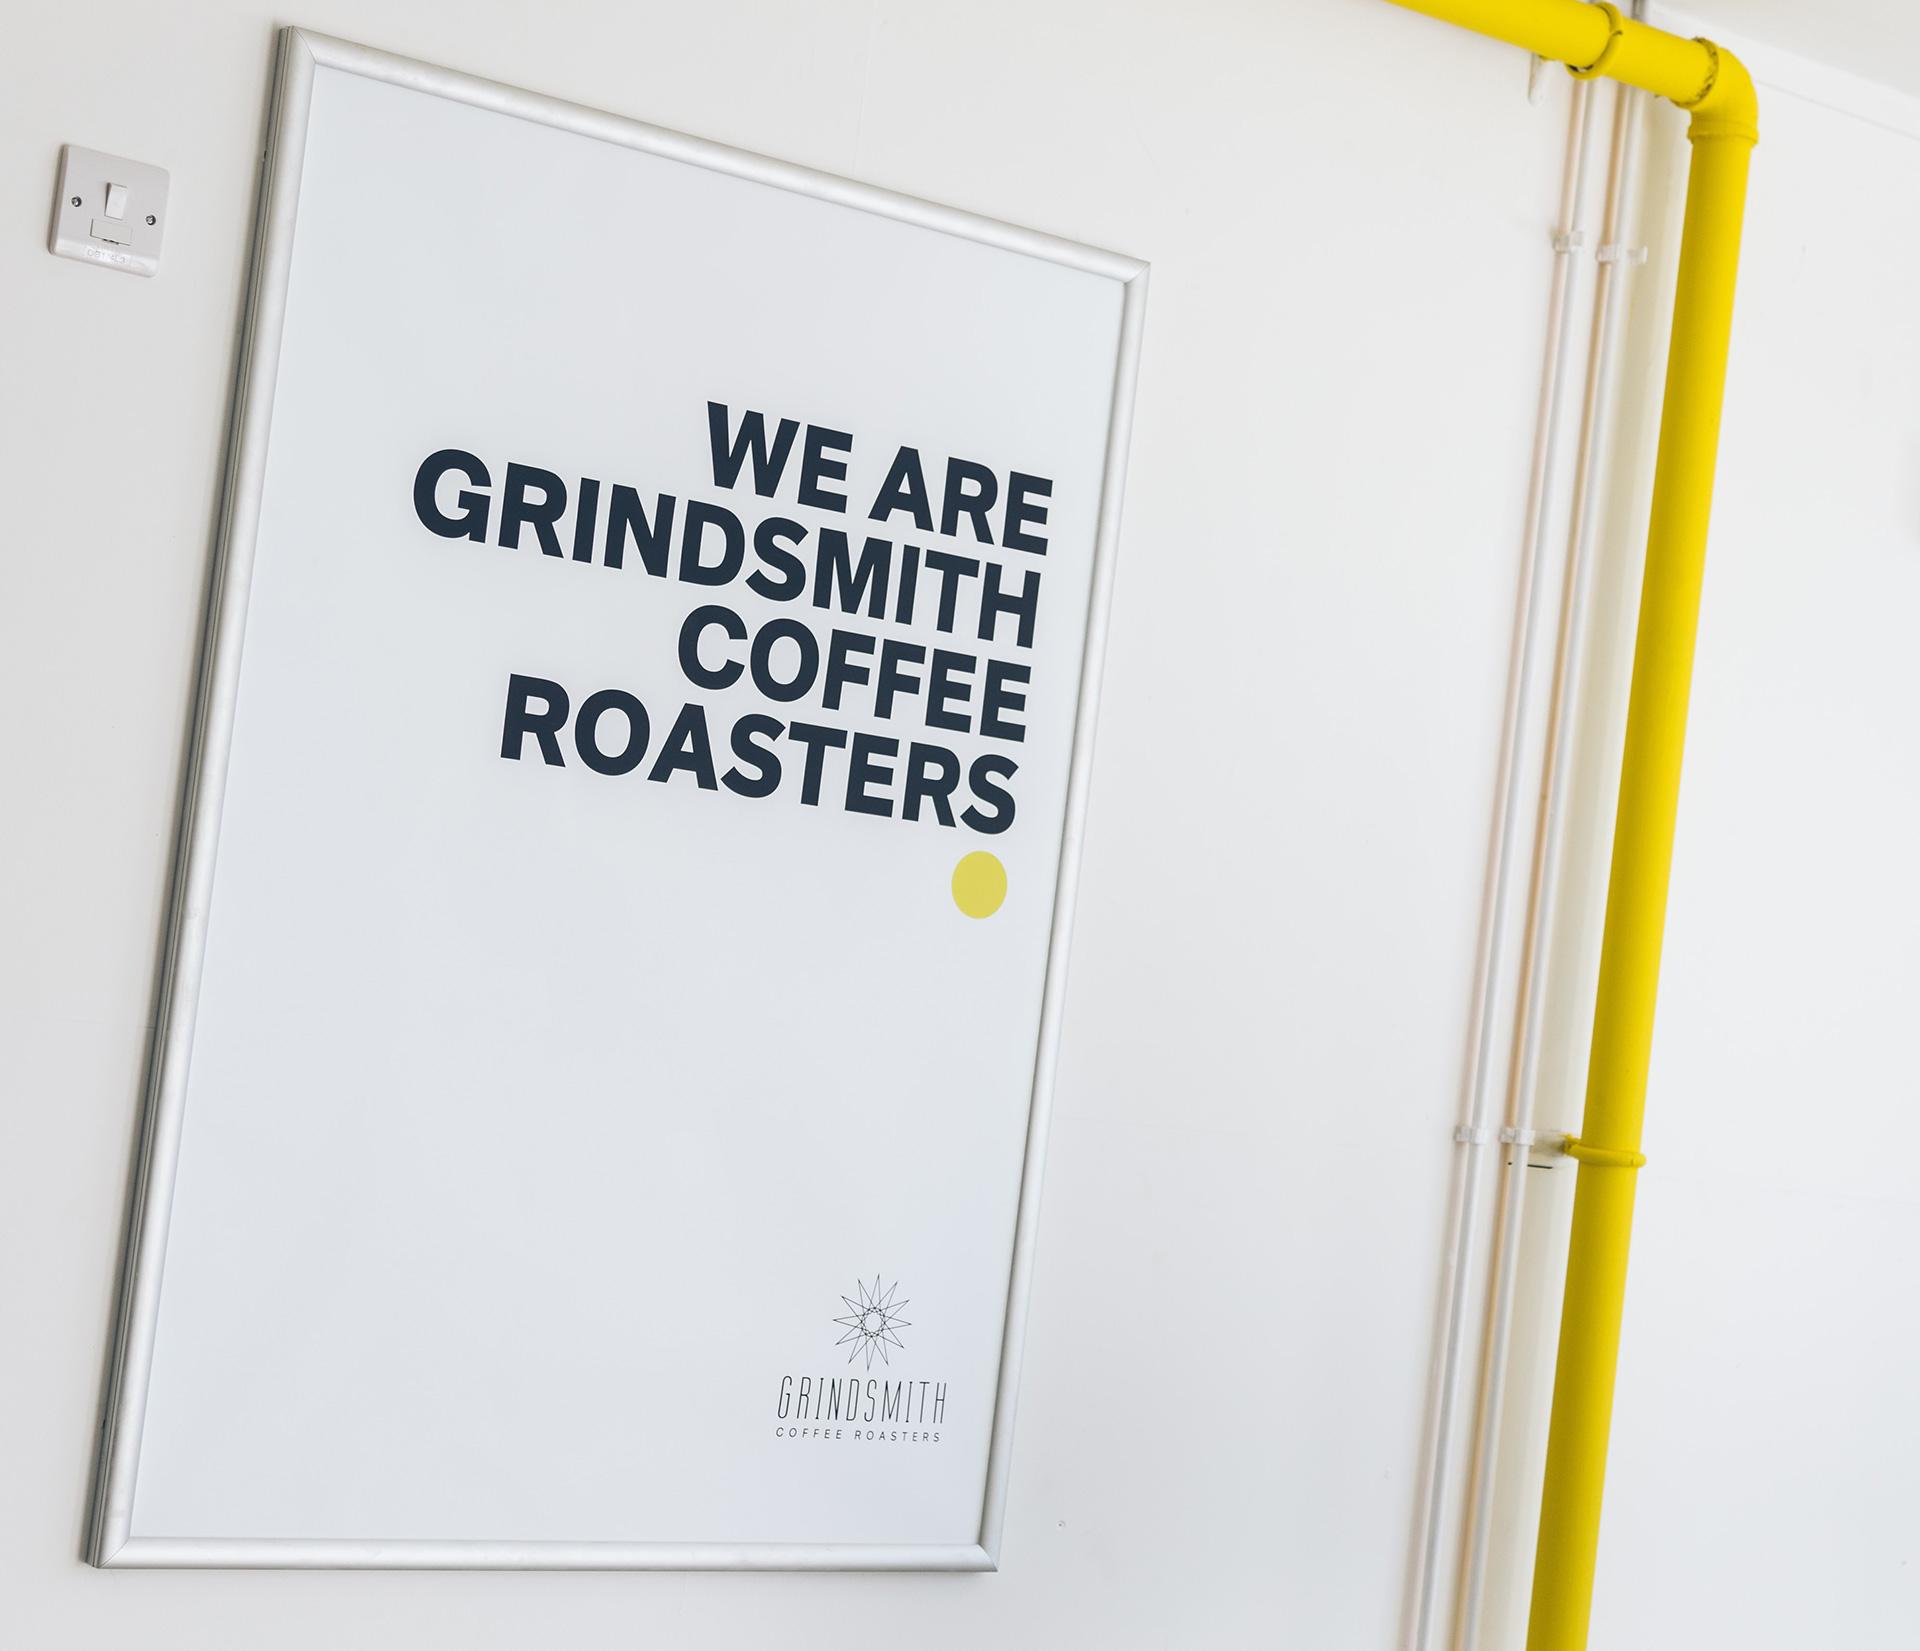 grindsmith coffee manchester england